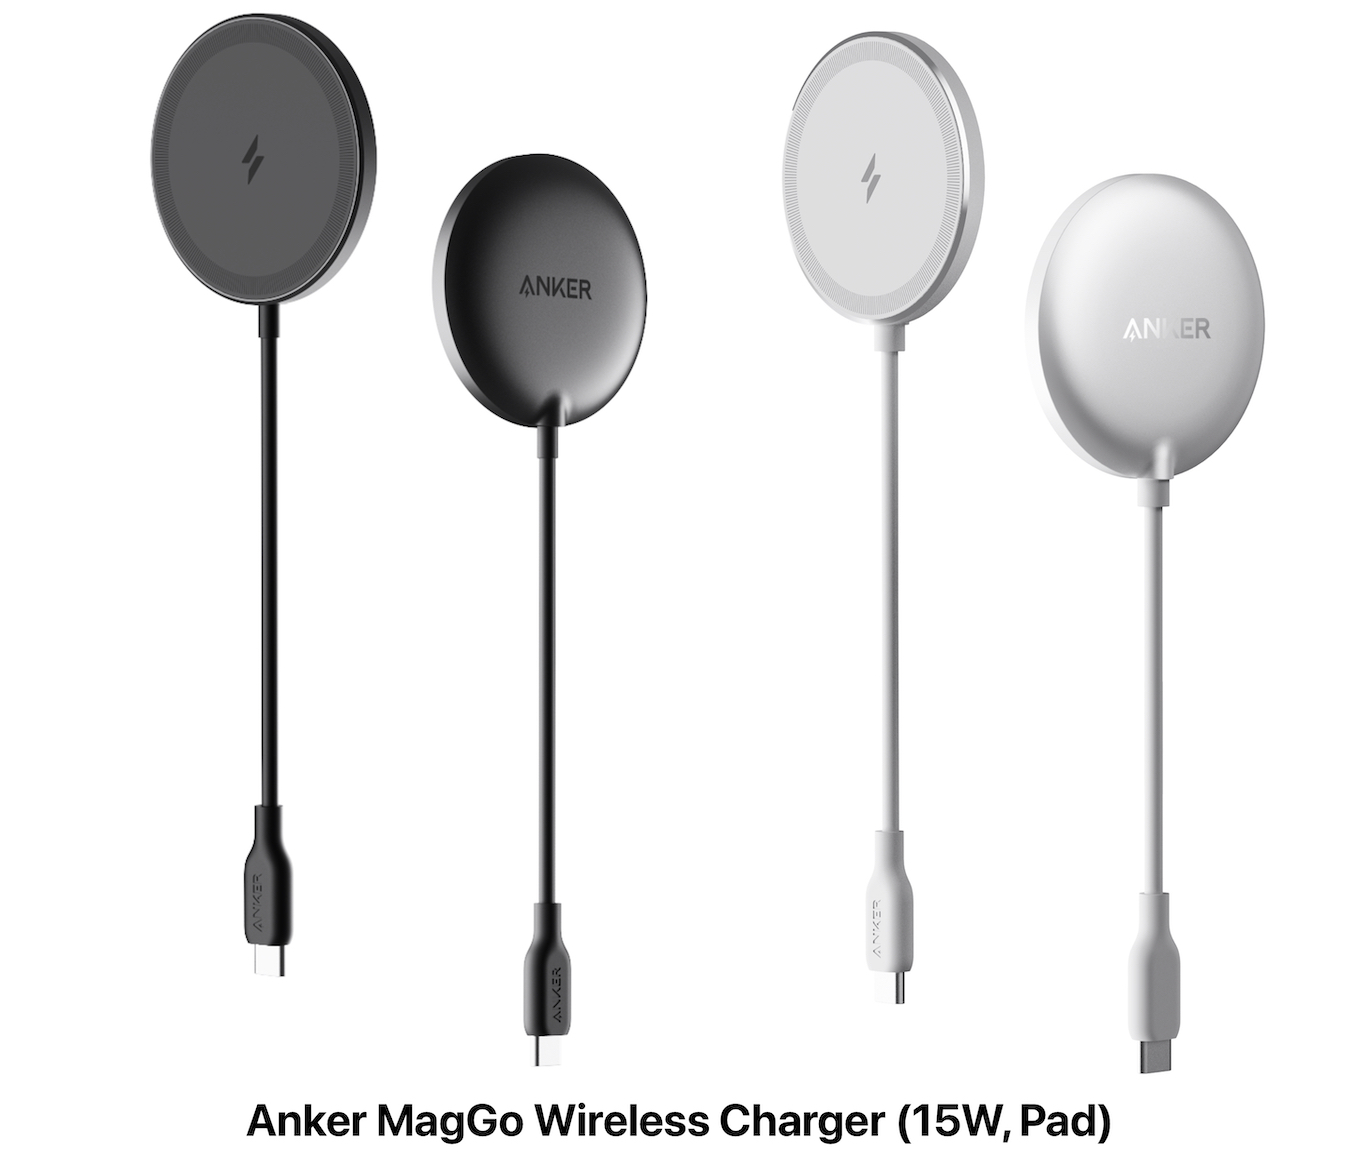 Anker MagGo Wireless Charger (15W, Pad)